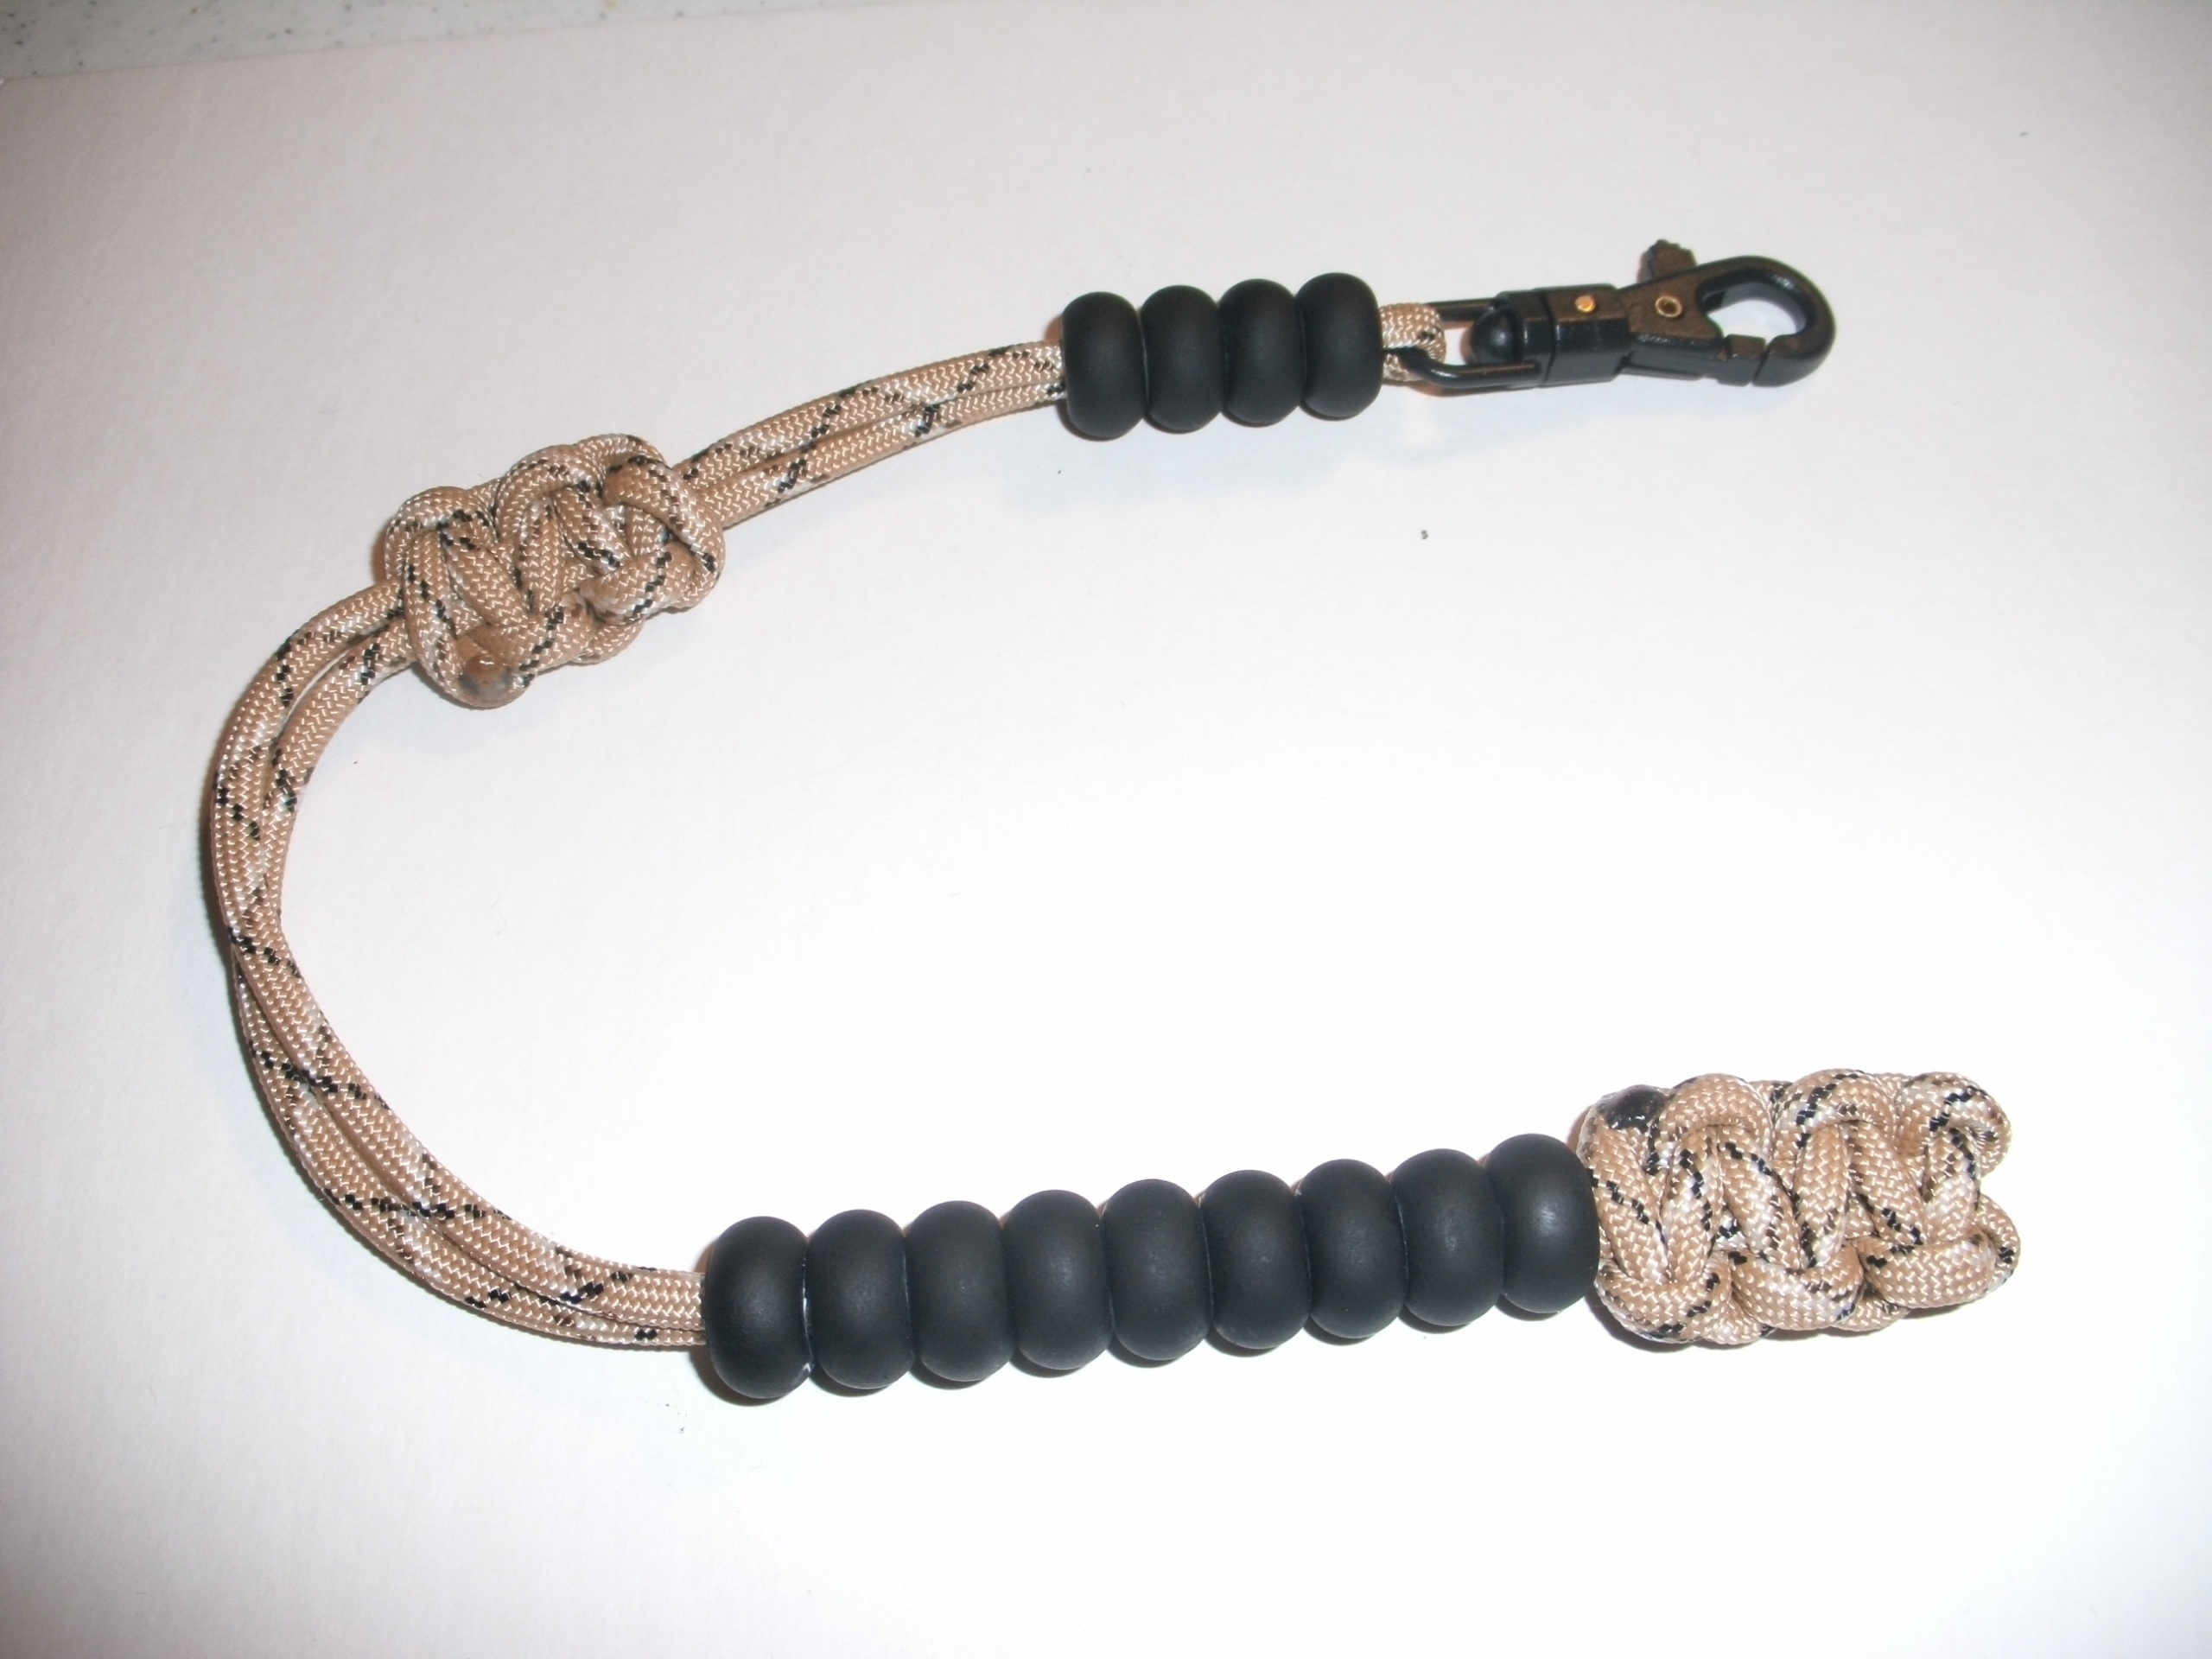 Customized Paracord Pace Counter Lanyard with Sliding Ranger Beads